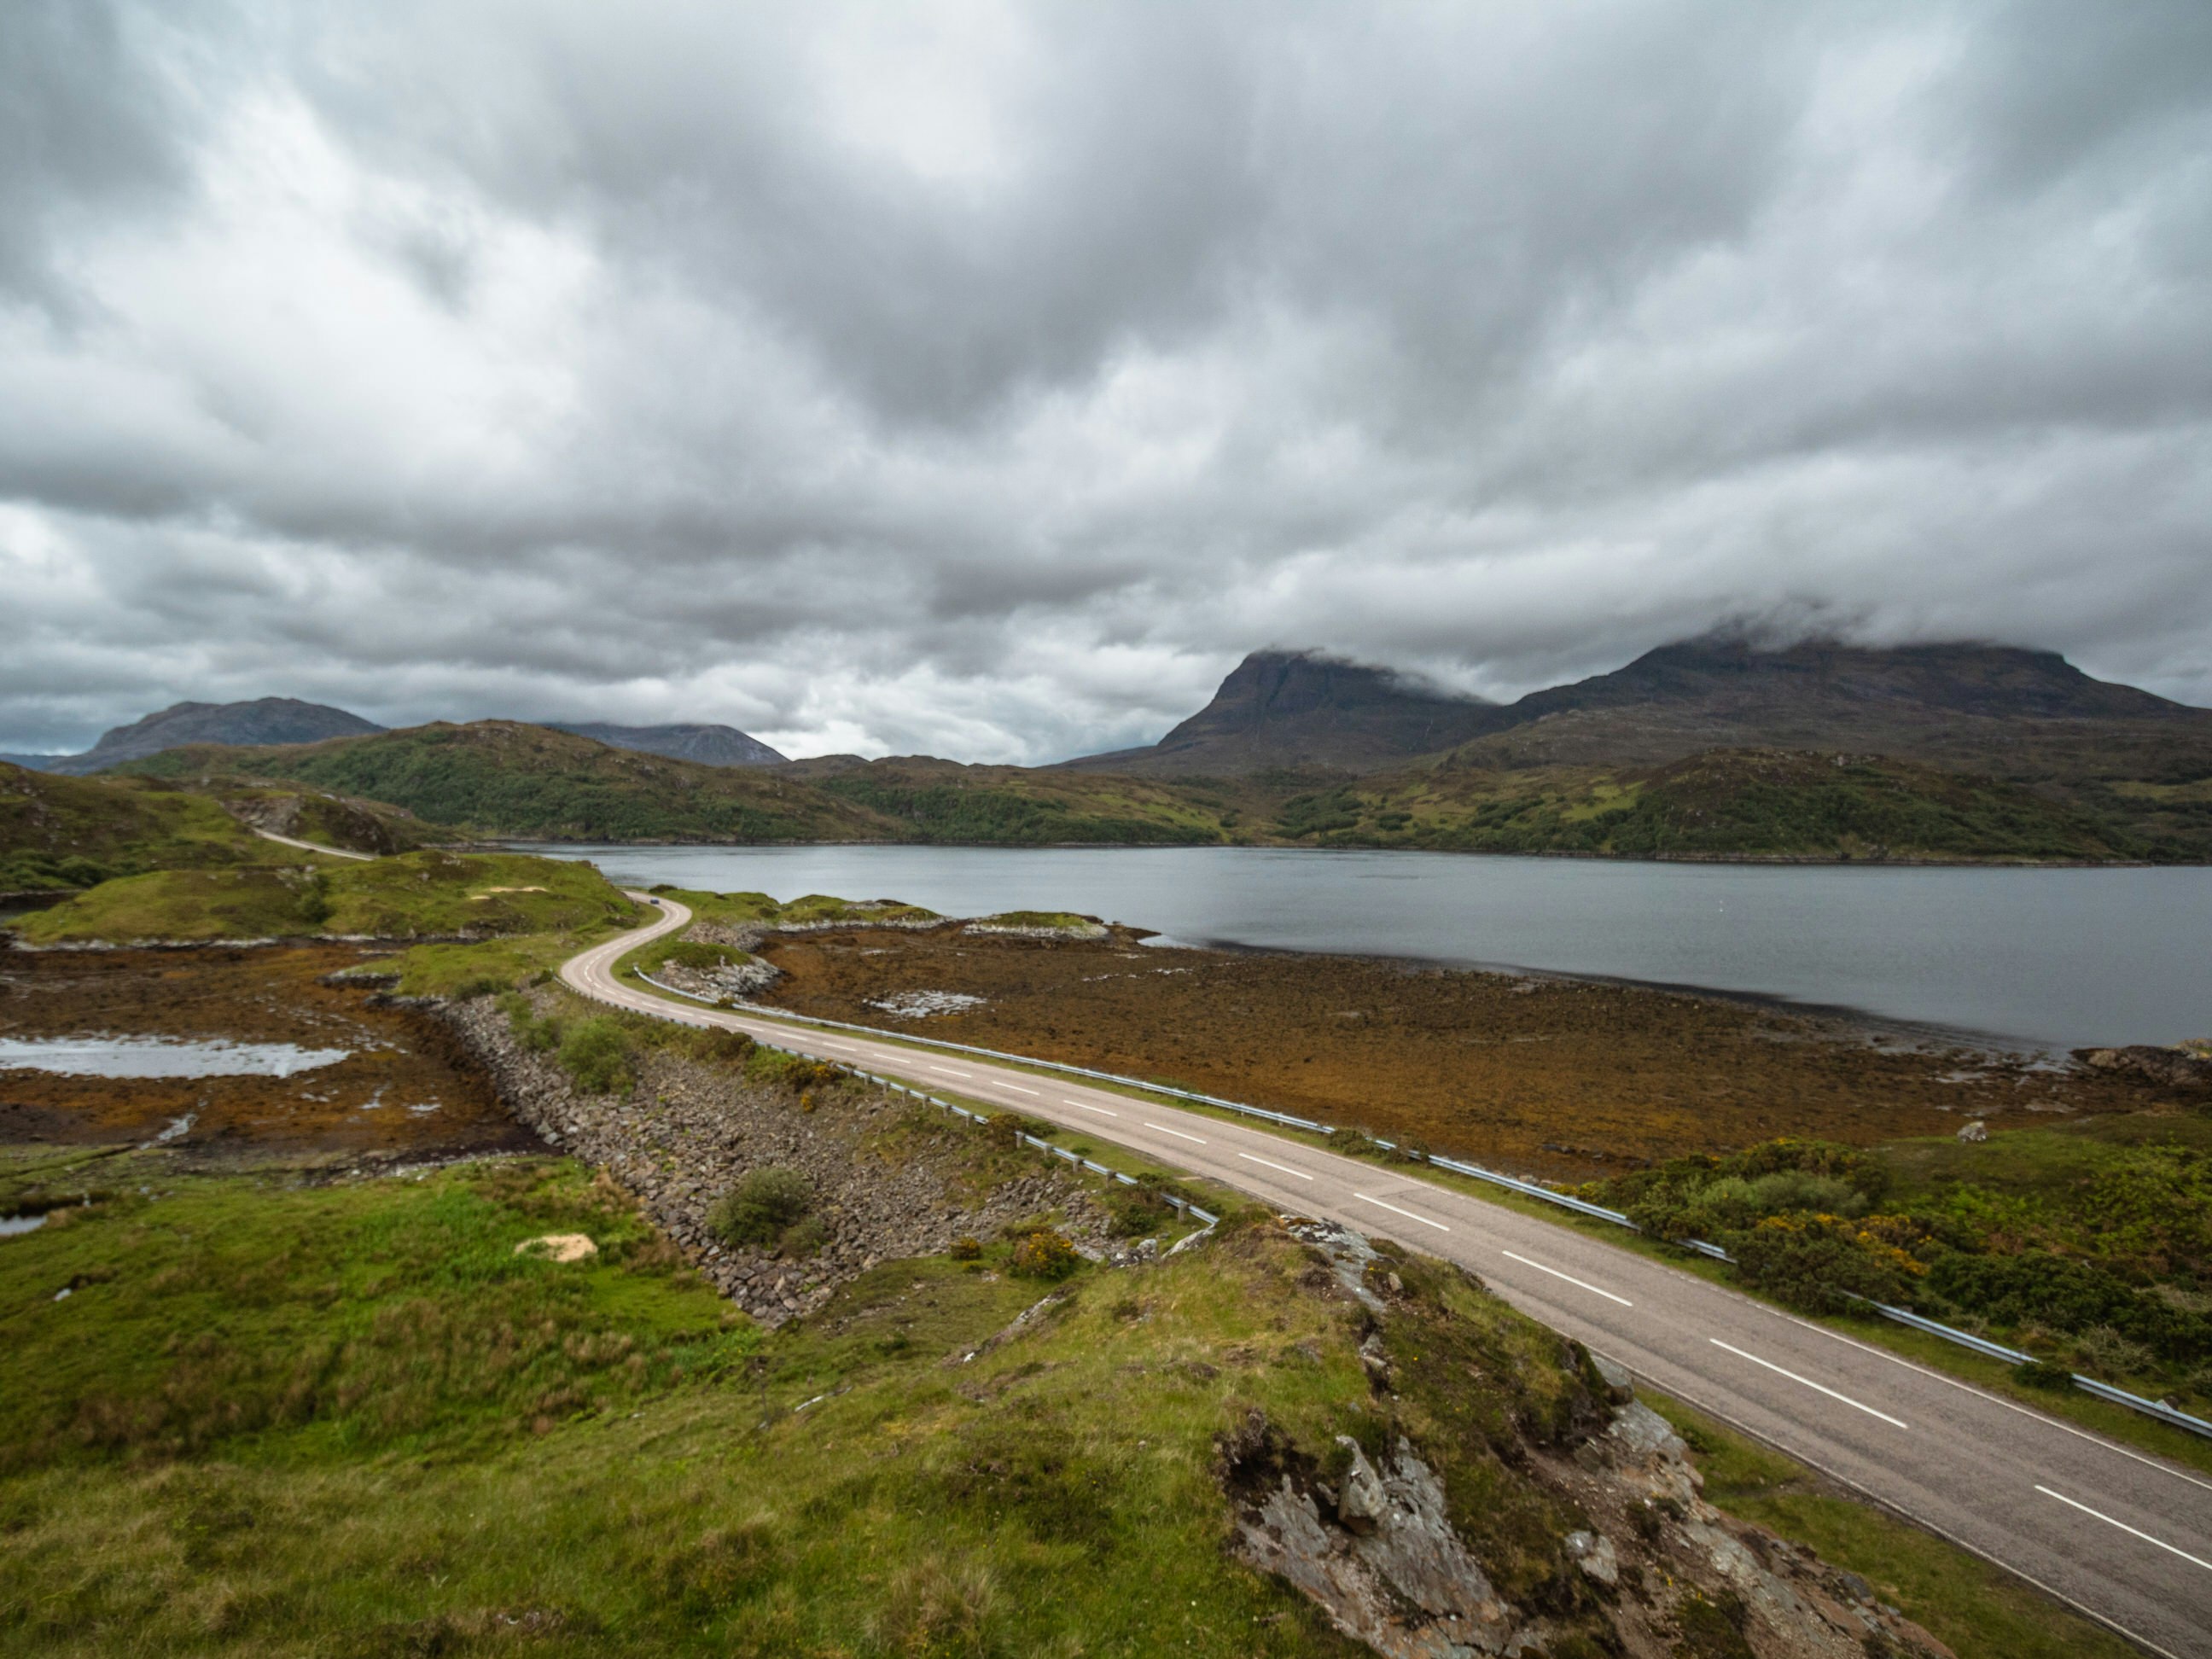 A narrow road winds a path beside a body of water in the Scottish Highlands; grey clouds linger on the low hills ahead.